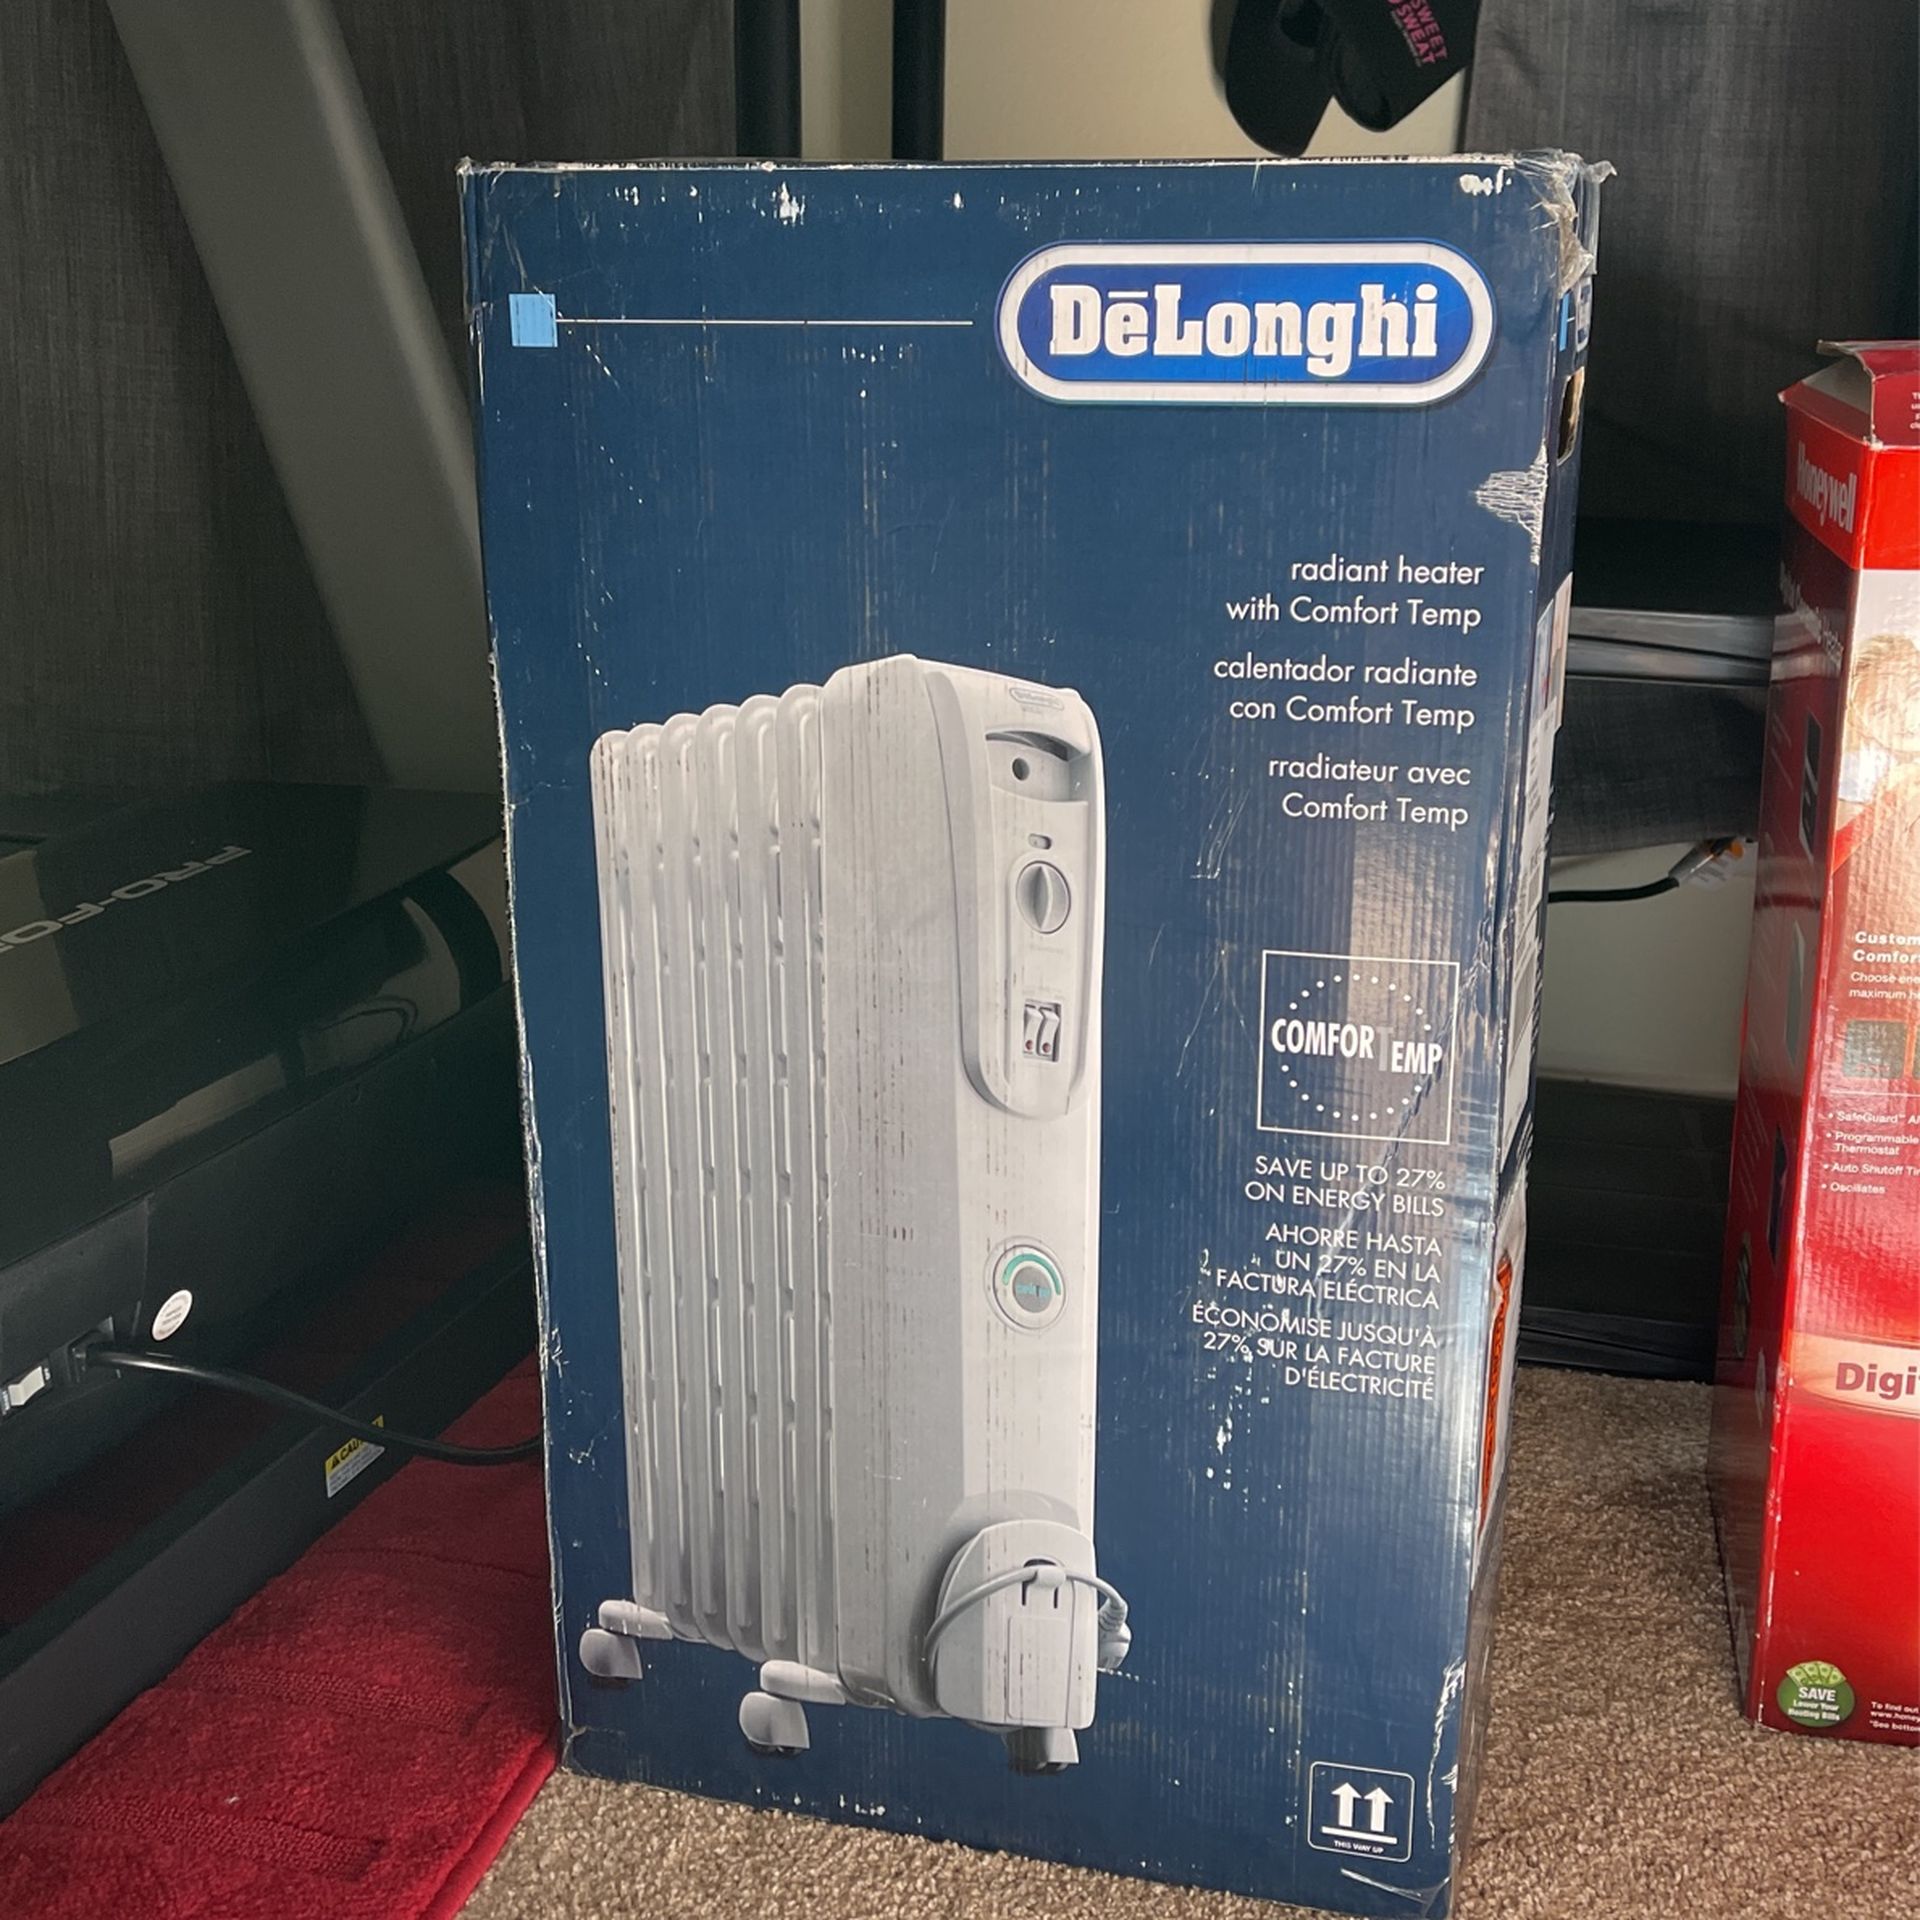 DeLonghi Radiant Heater Mint Condition 